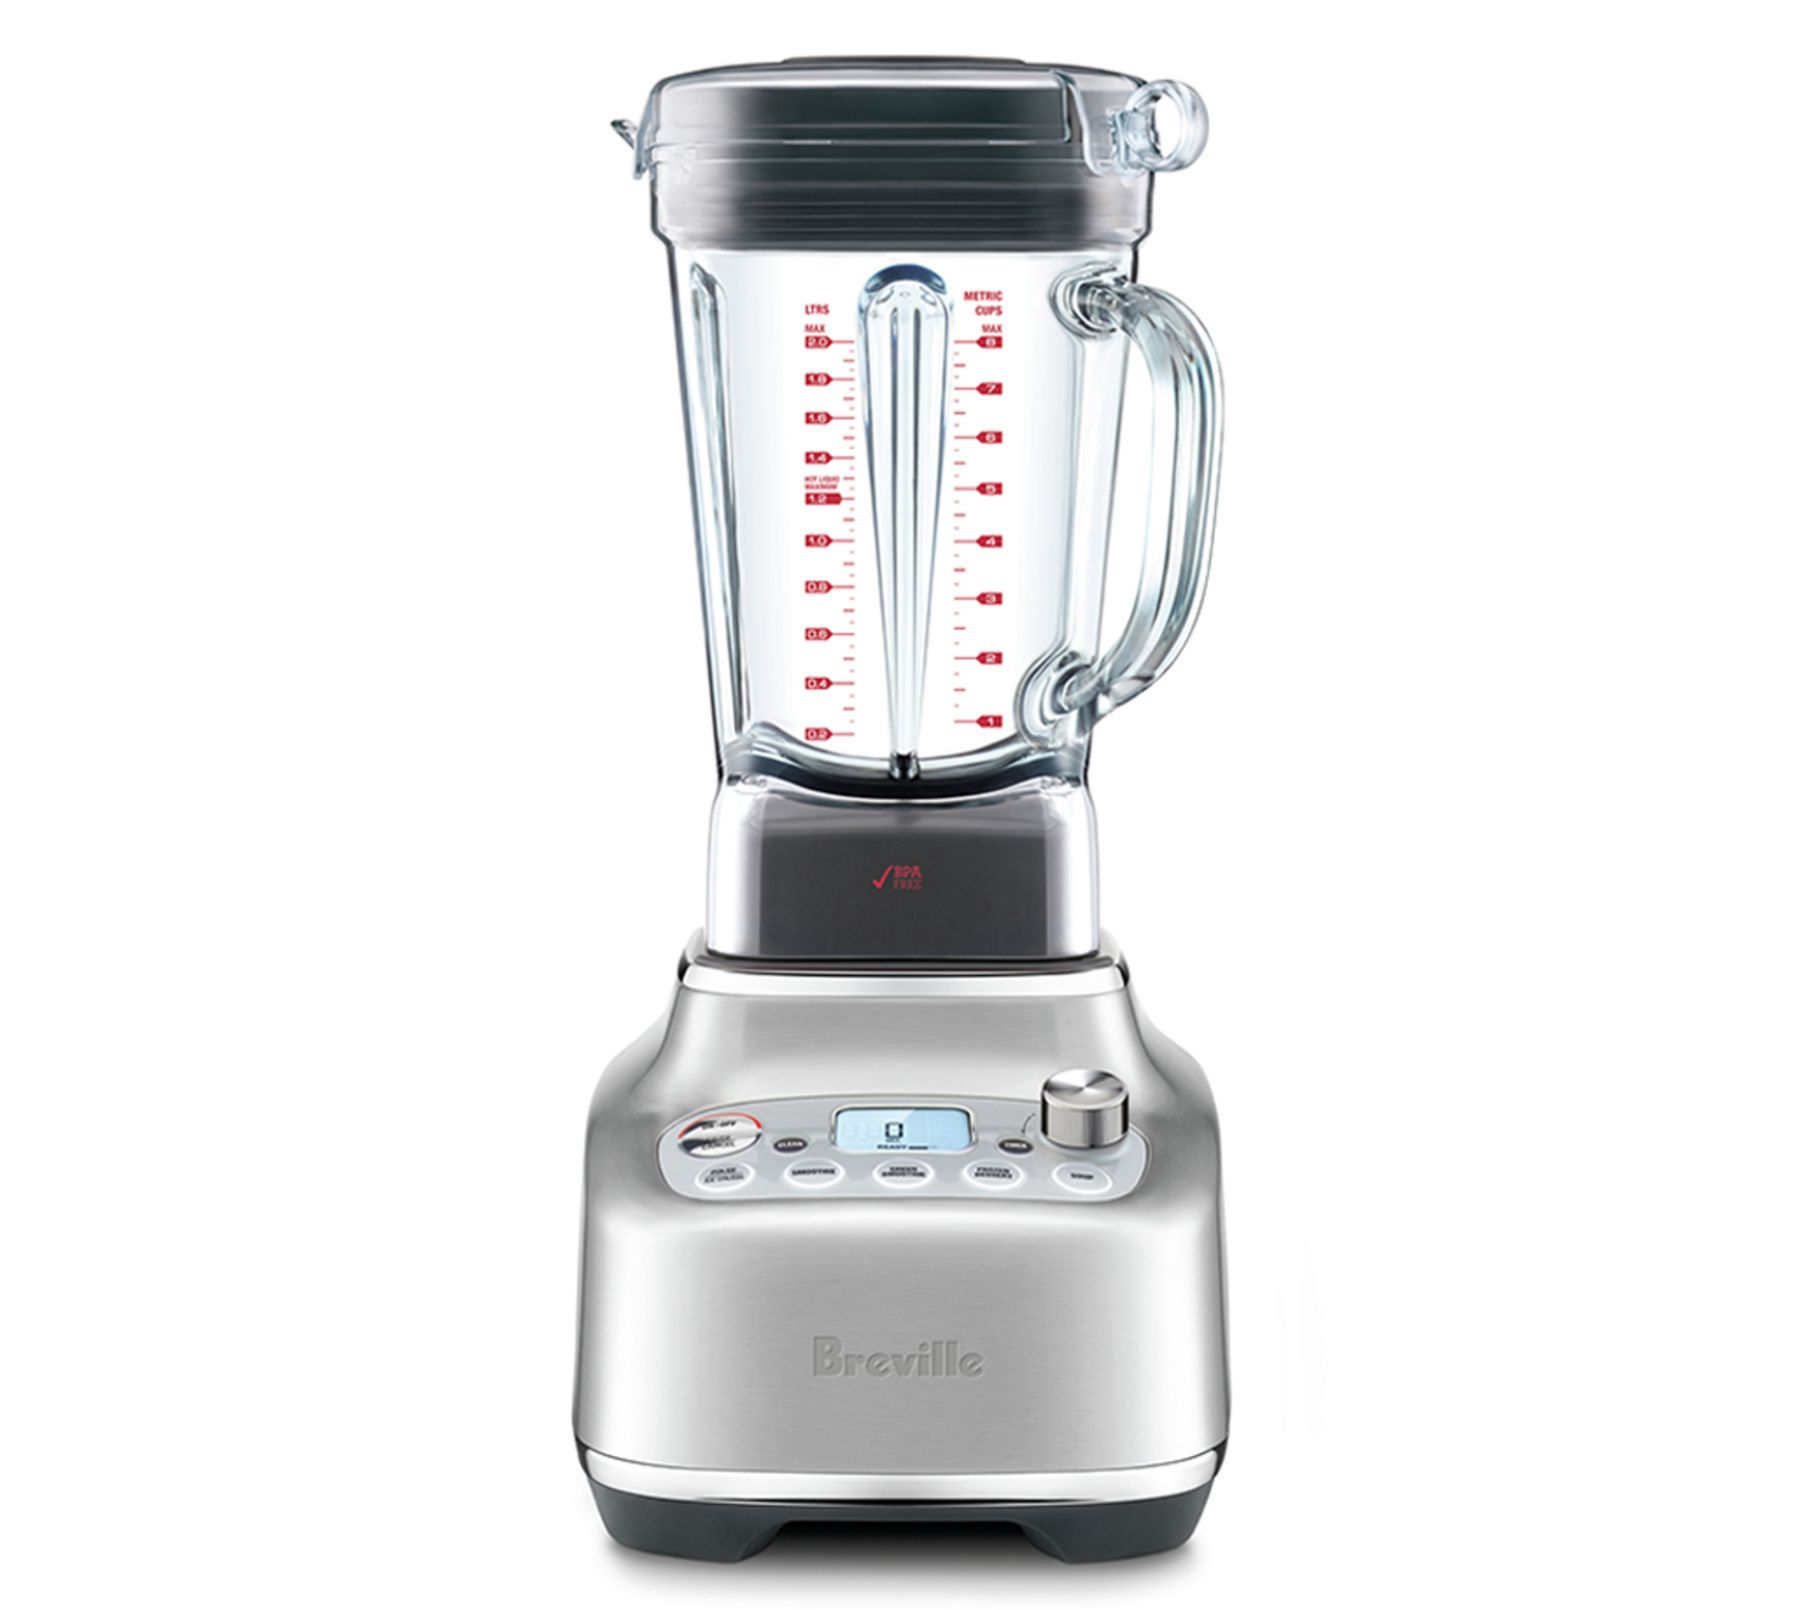 Blender  No need to force open the lid! The Breville Fresh